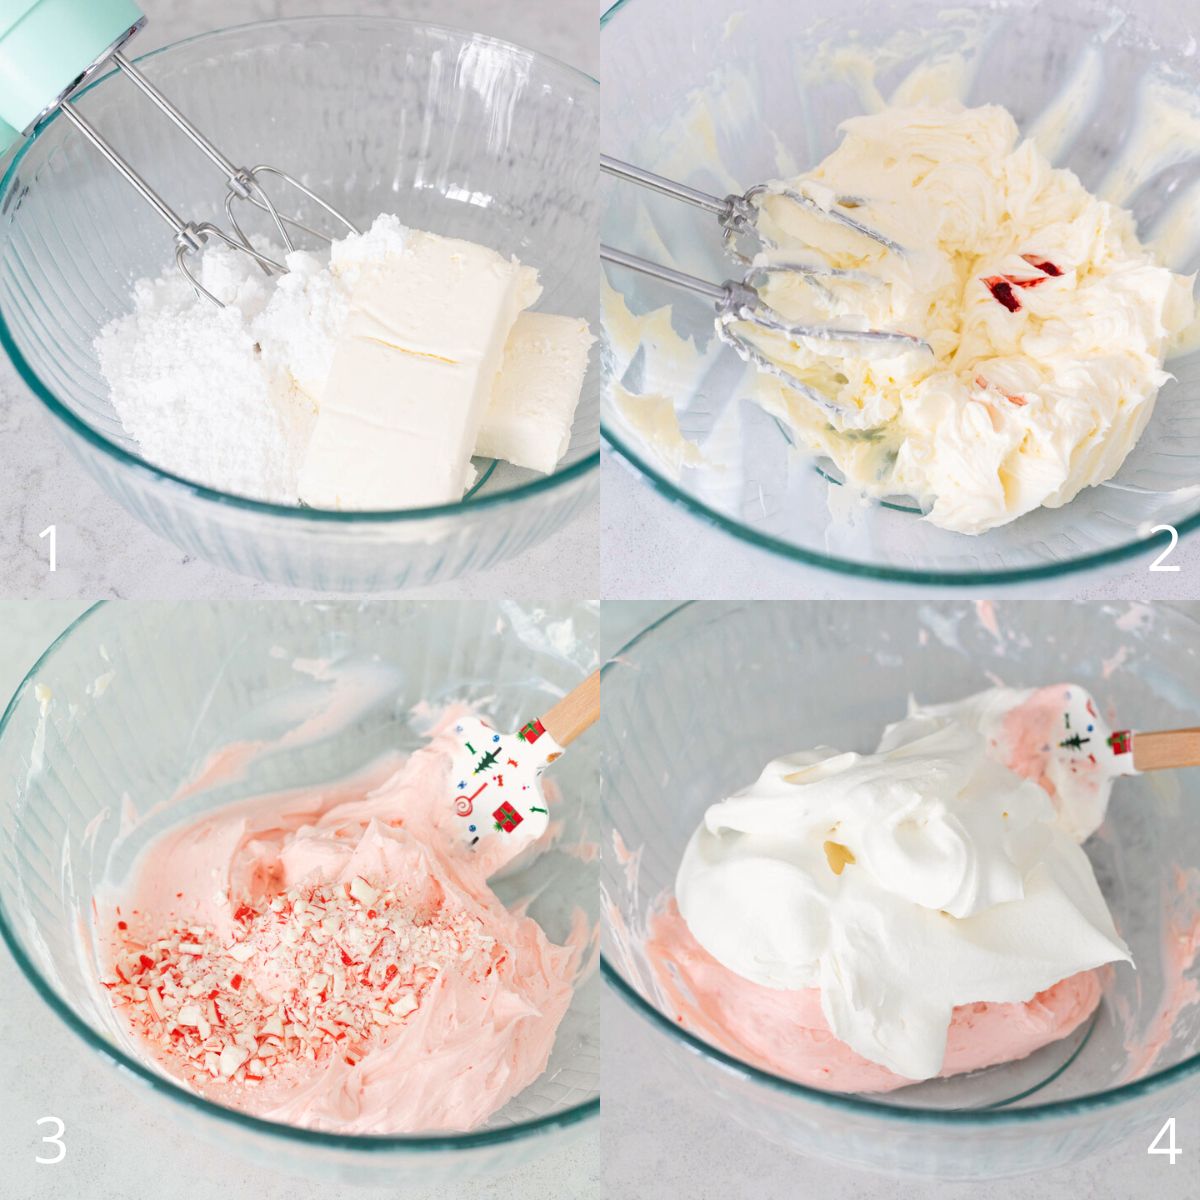 The step by step photos show how to whip the cream cheese and powdered sugar together and flavor with peppermint extract for the candy cane pie.